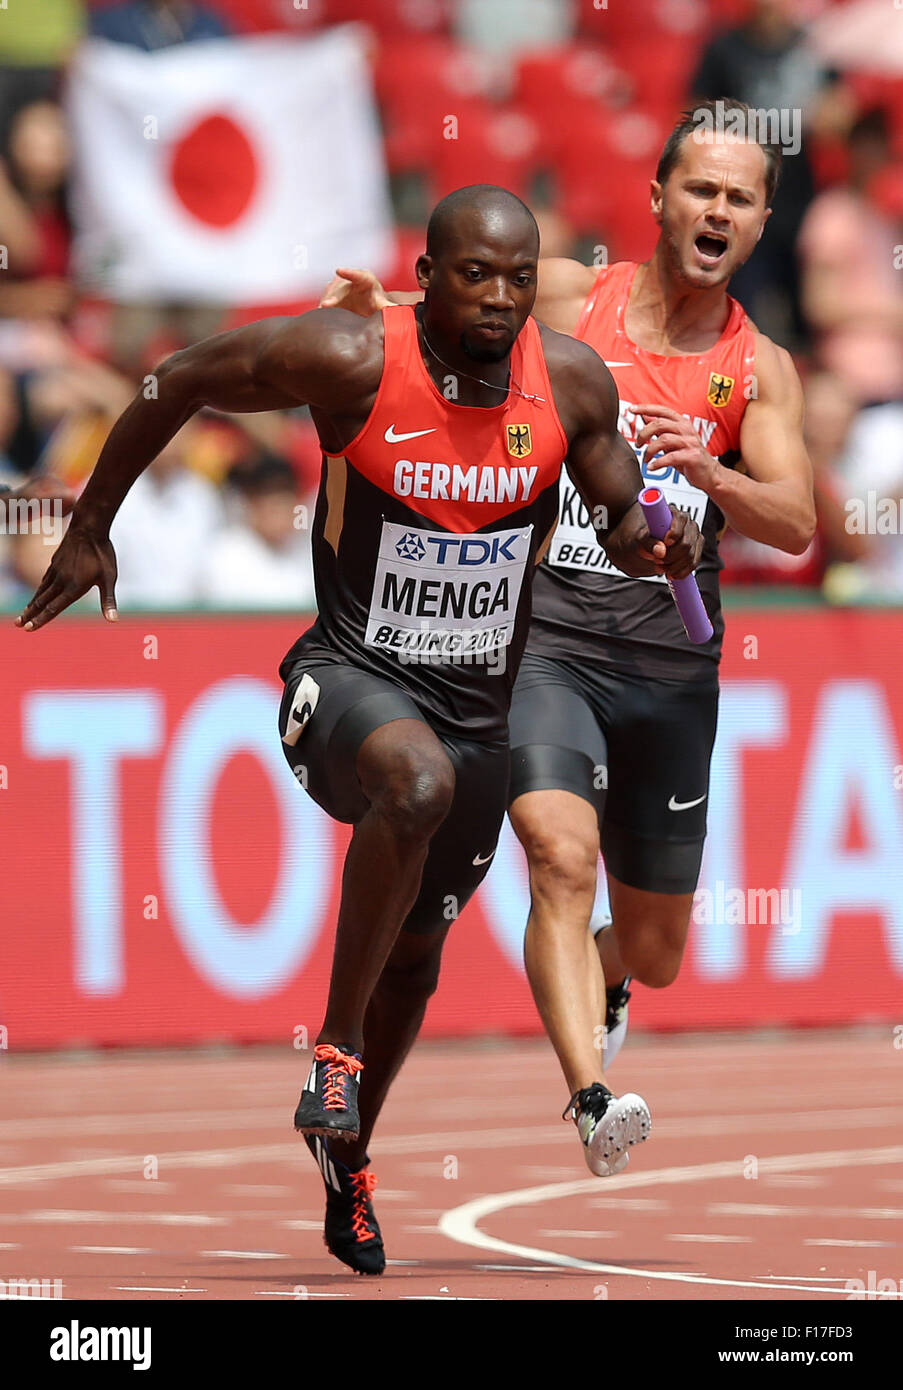 Beijing, China. 29th Aug, 2015. Germany's Aleixo-Platini Menga and Alexander Kosenkow (r) in action in the men's 4x100 M Relay Qualification at the 15th International Association of Athletics Federations (IAAF) Athletics World Championships at the National stadium, known as Bird's Nest, in Beijing, China, 29 August 2015. Photo: Christian Charisius/dpa/Alamy Live News Stock Photo